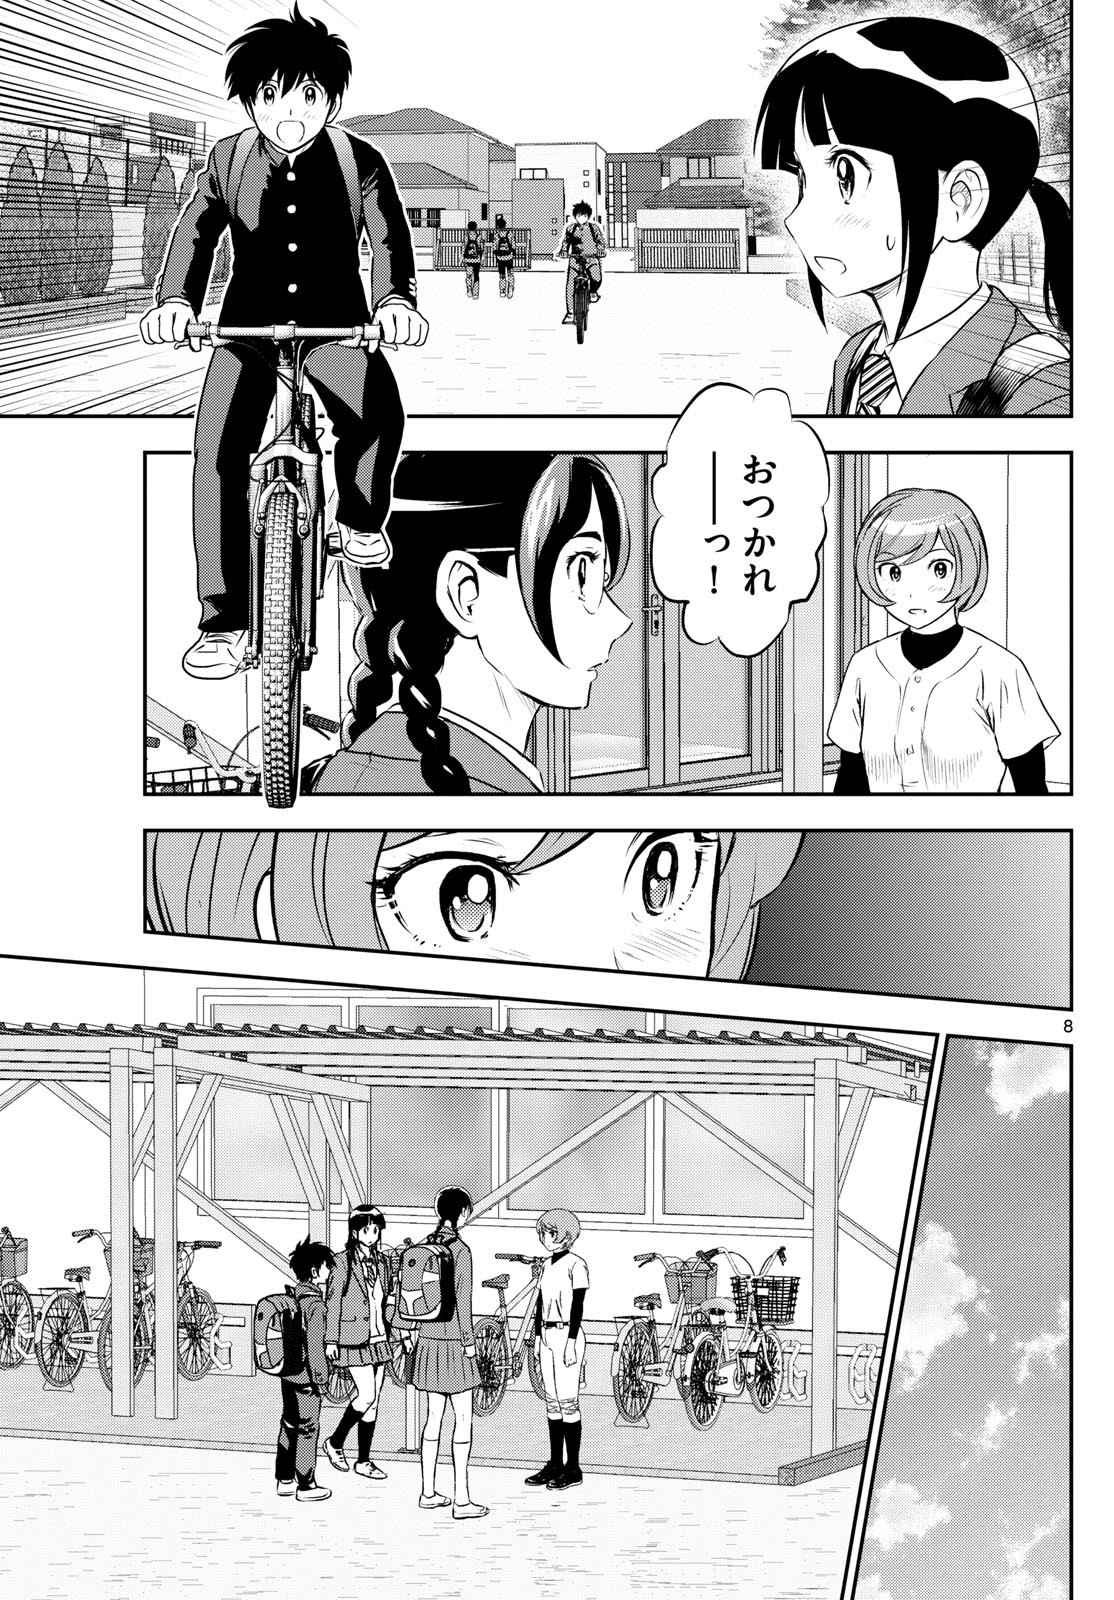 Major 2nd - メジャーセカンド - Chapter 279 - Page 9